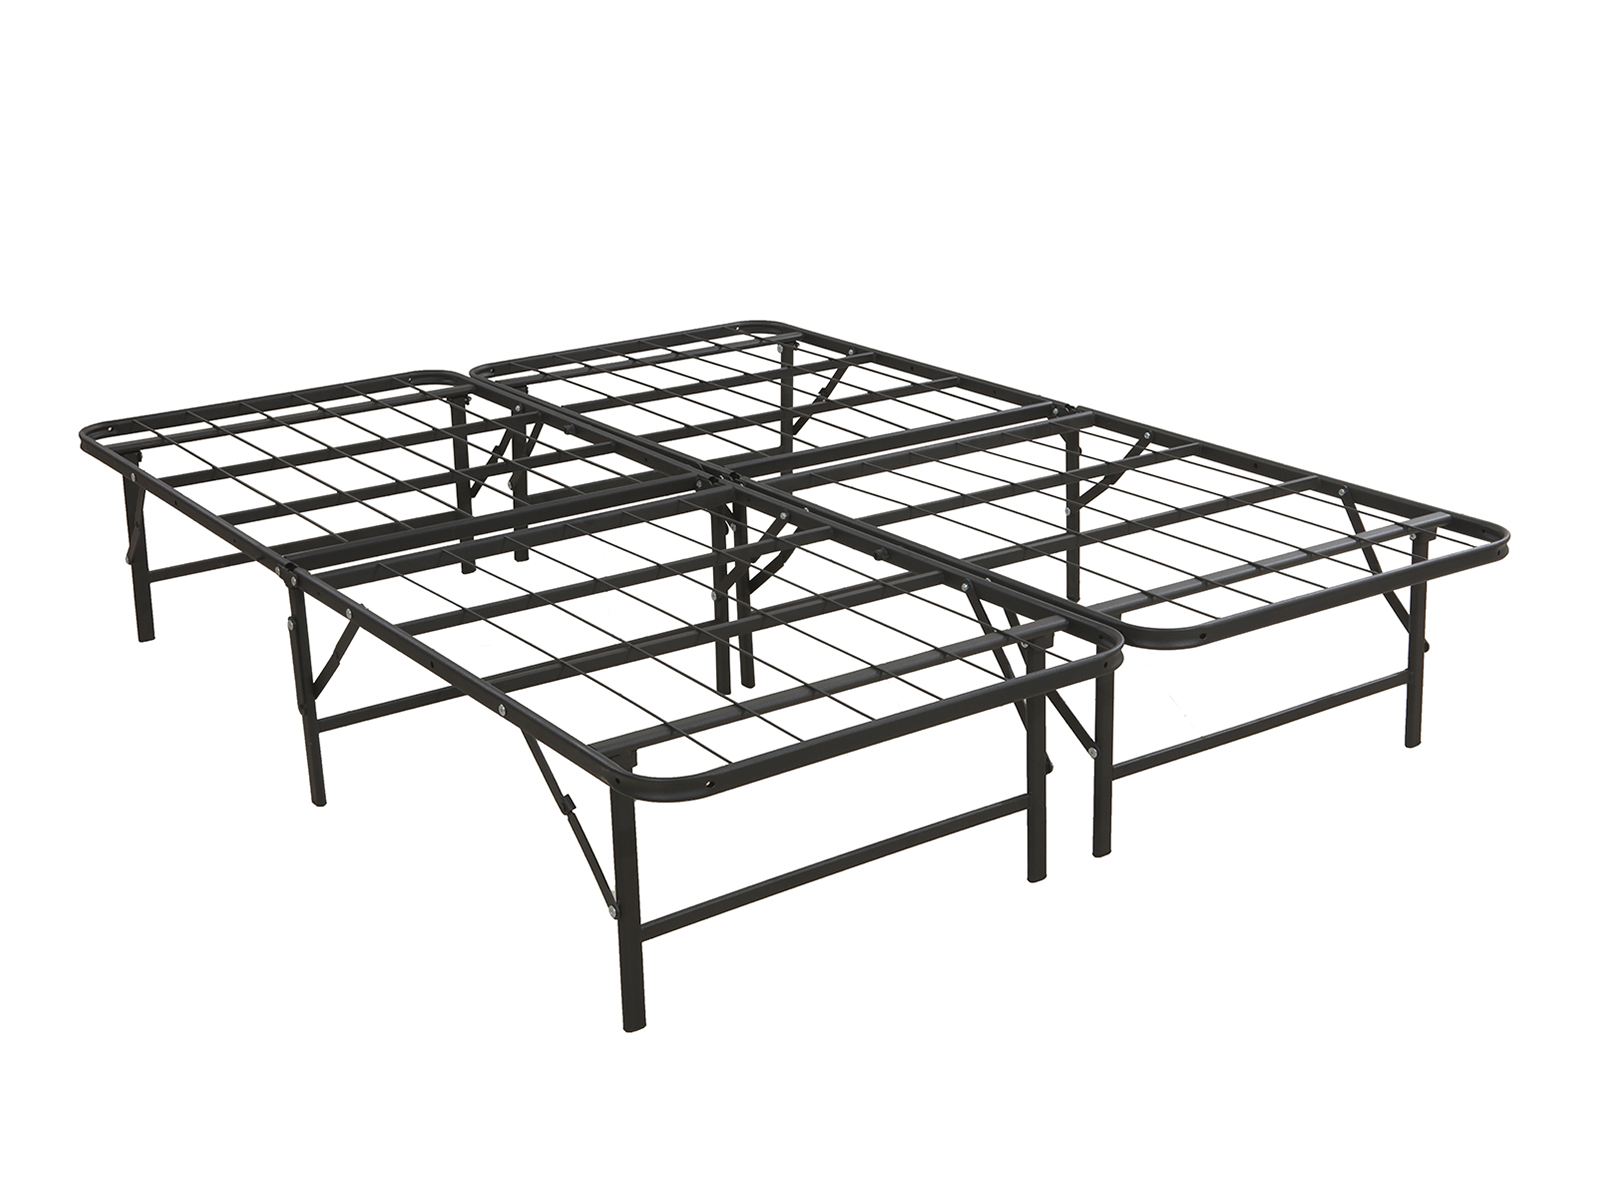 Mattress Firm Platform Bed Frame | California King | Deluxe Raised Metal | Easy Assembly